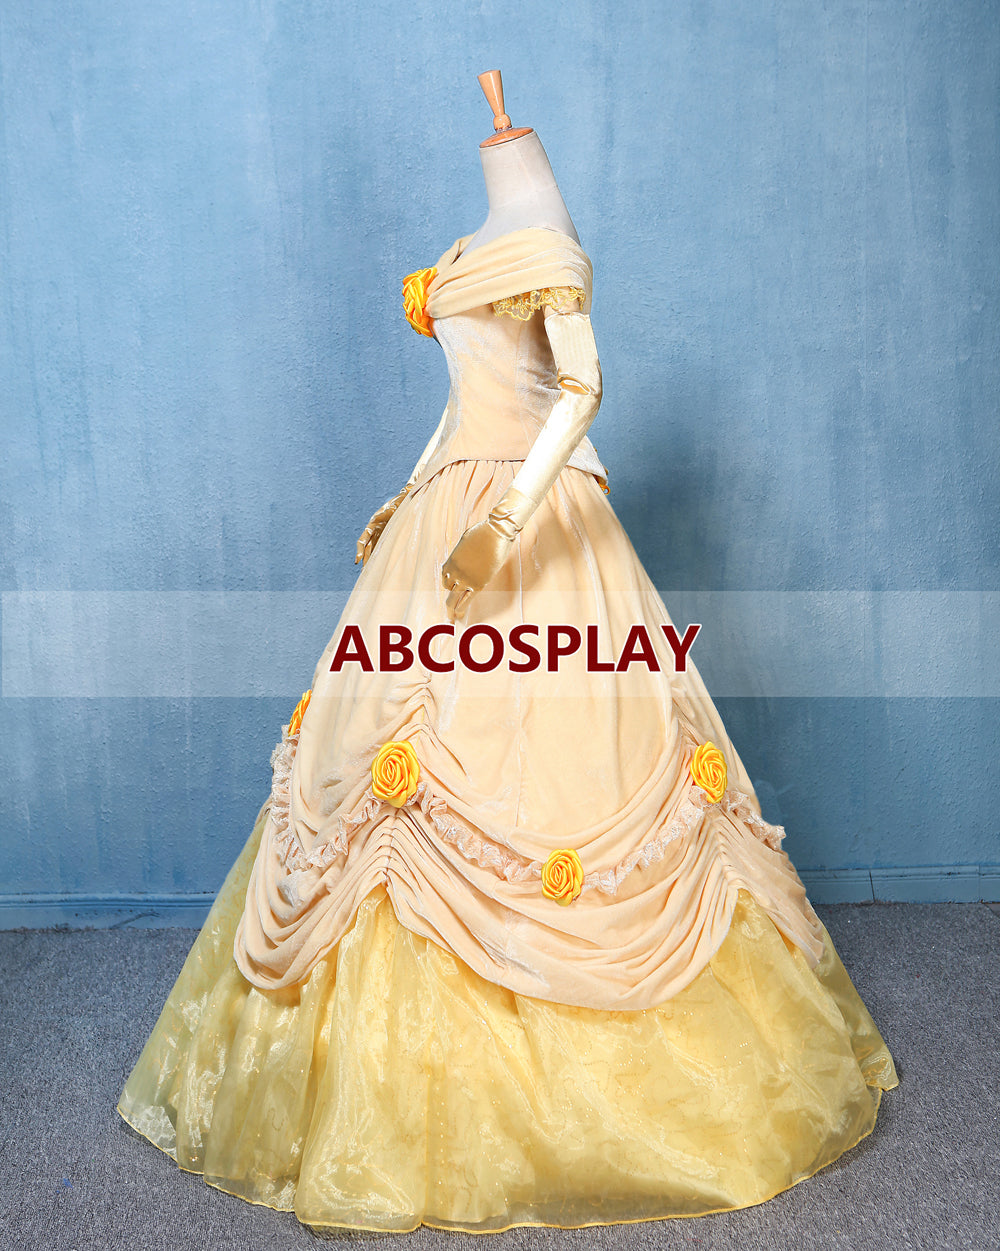 Beauty And The Beast Princess Dress With Gold Yellow Flowers Cosplay Costume